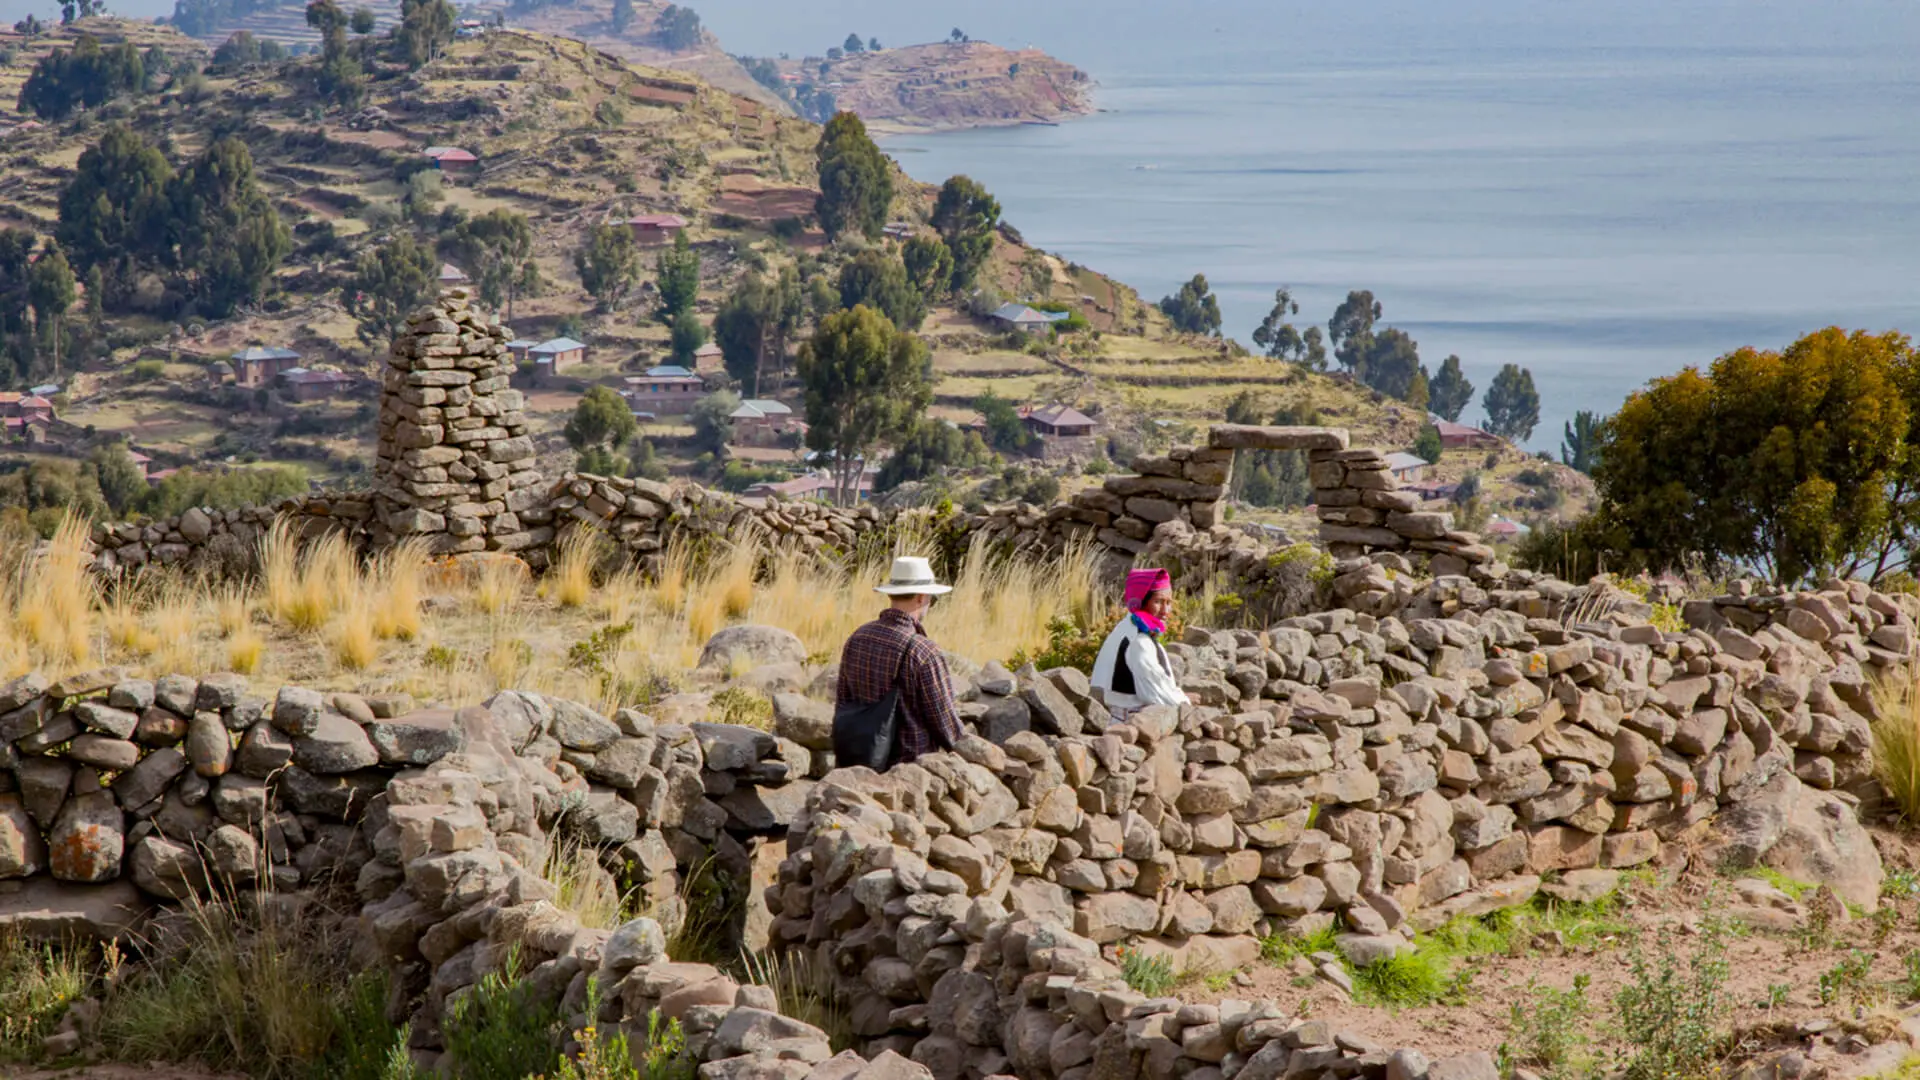 Taquile island's lanscape of rockwalled paths, cropfields and the lake Titicaca | RESPONSible Travel Peru